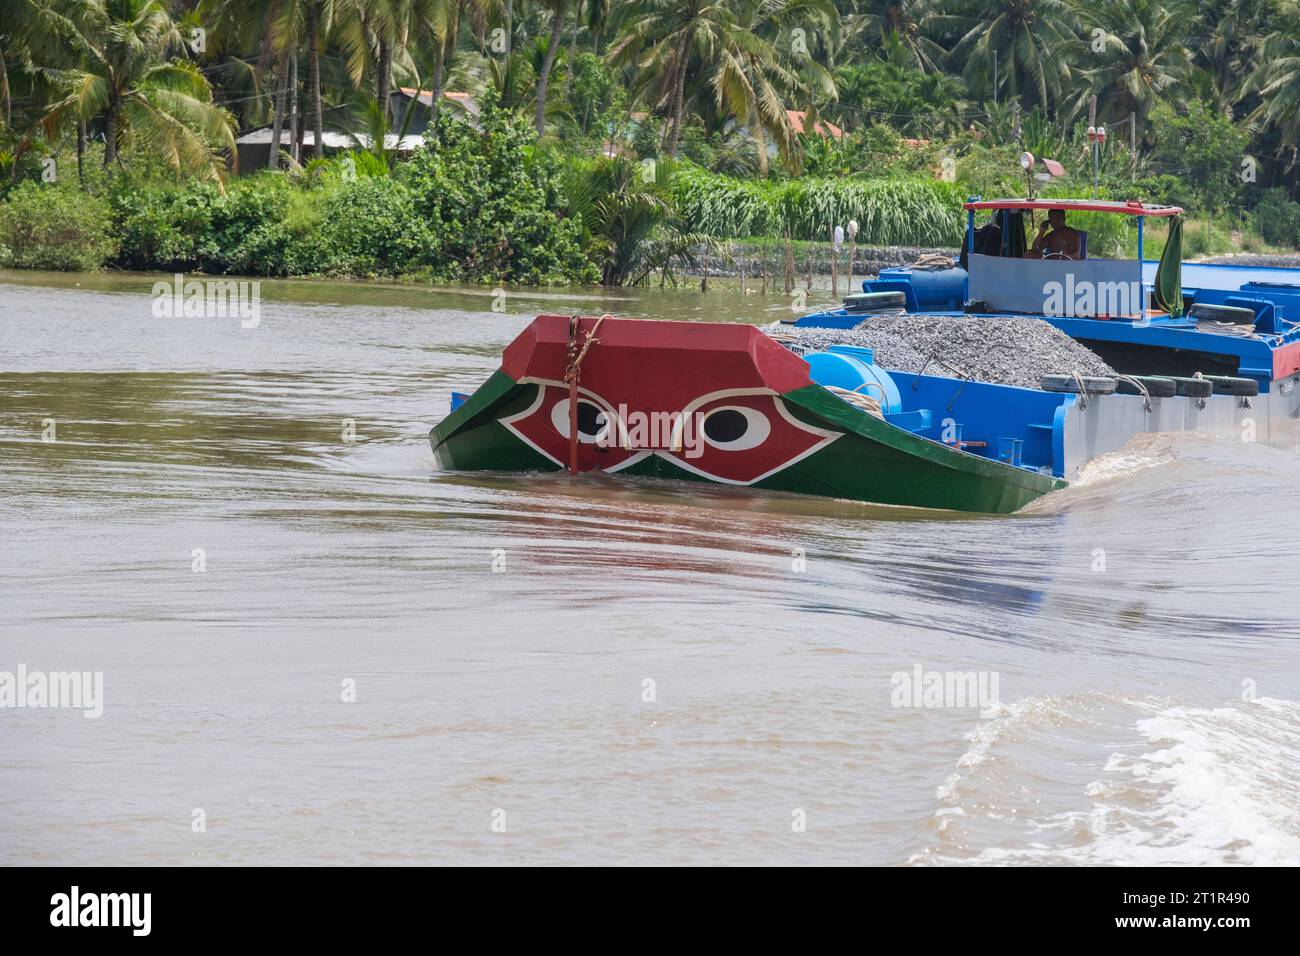 River Traffic on Saigon  River, Vietnam. Black Eyes in White Circle on Prow of Boat are Traditional Protection against Evil River Spirits. Stock Photo